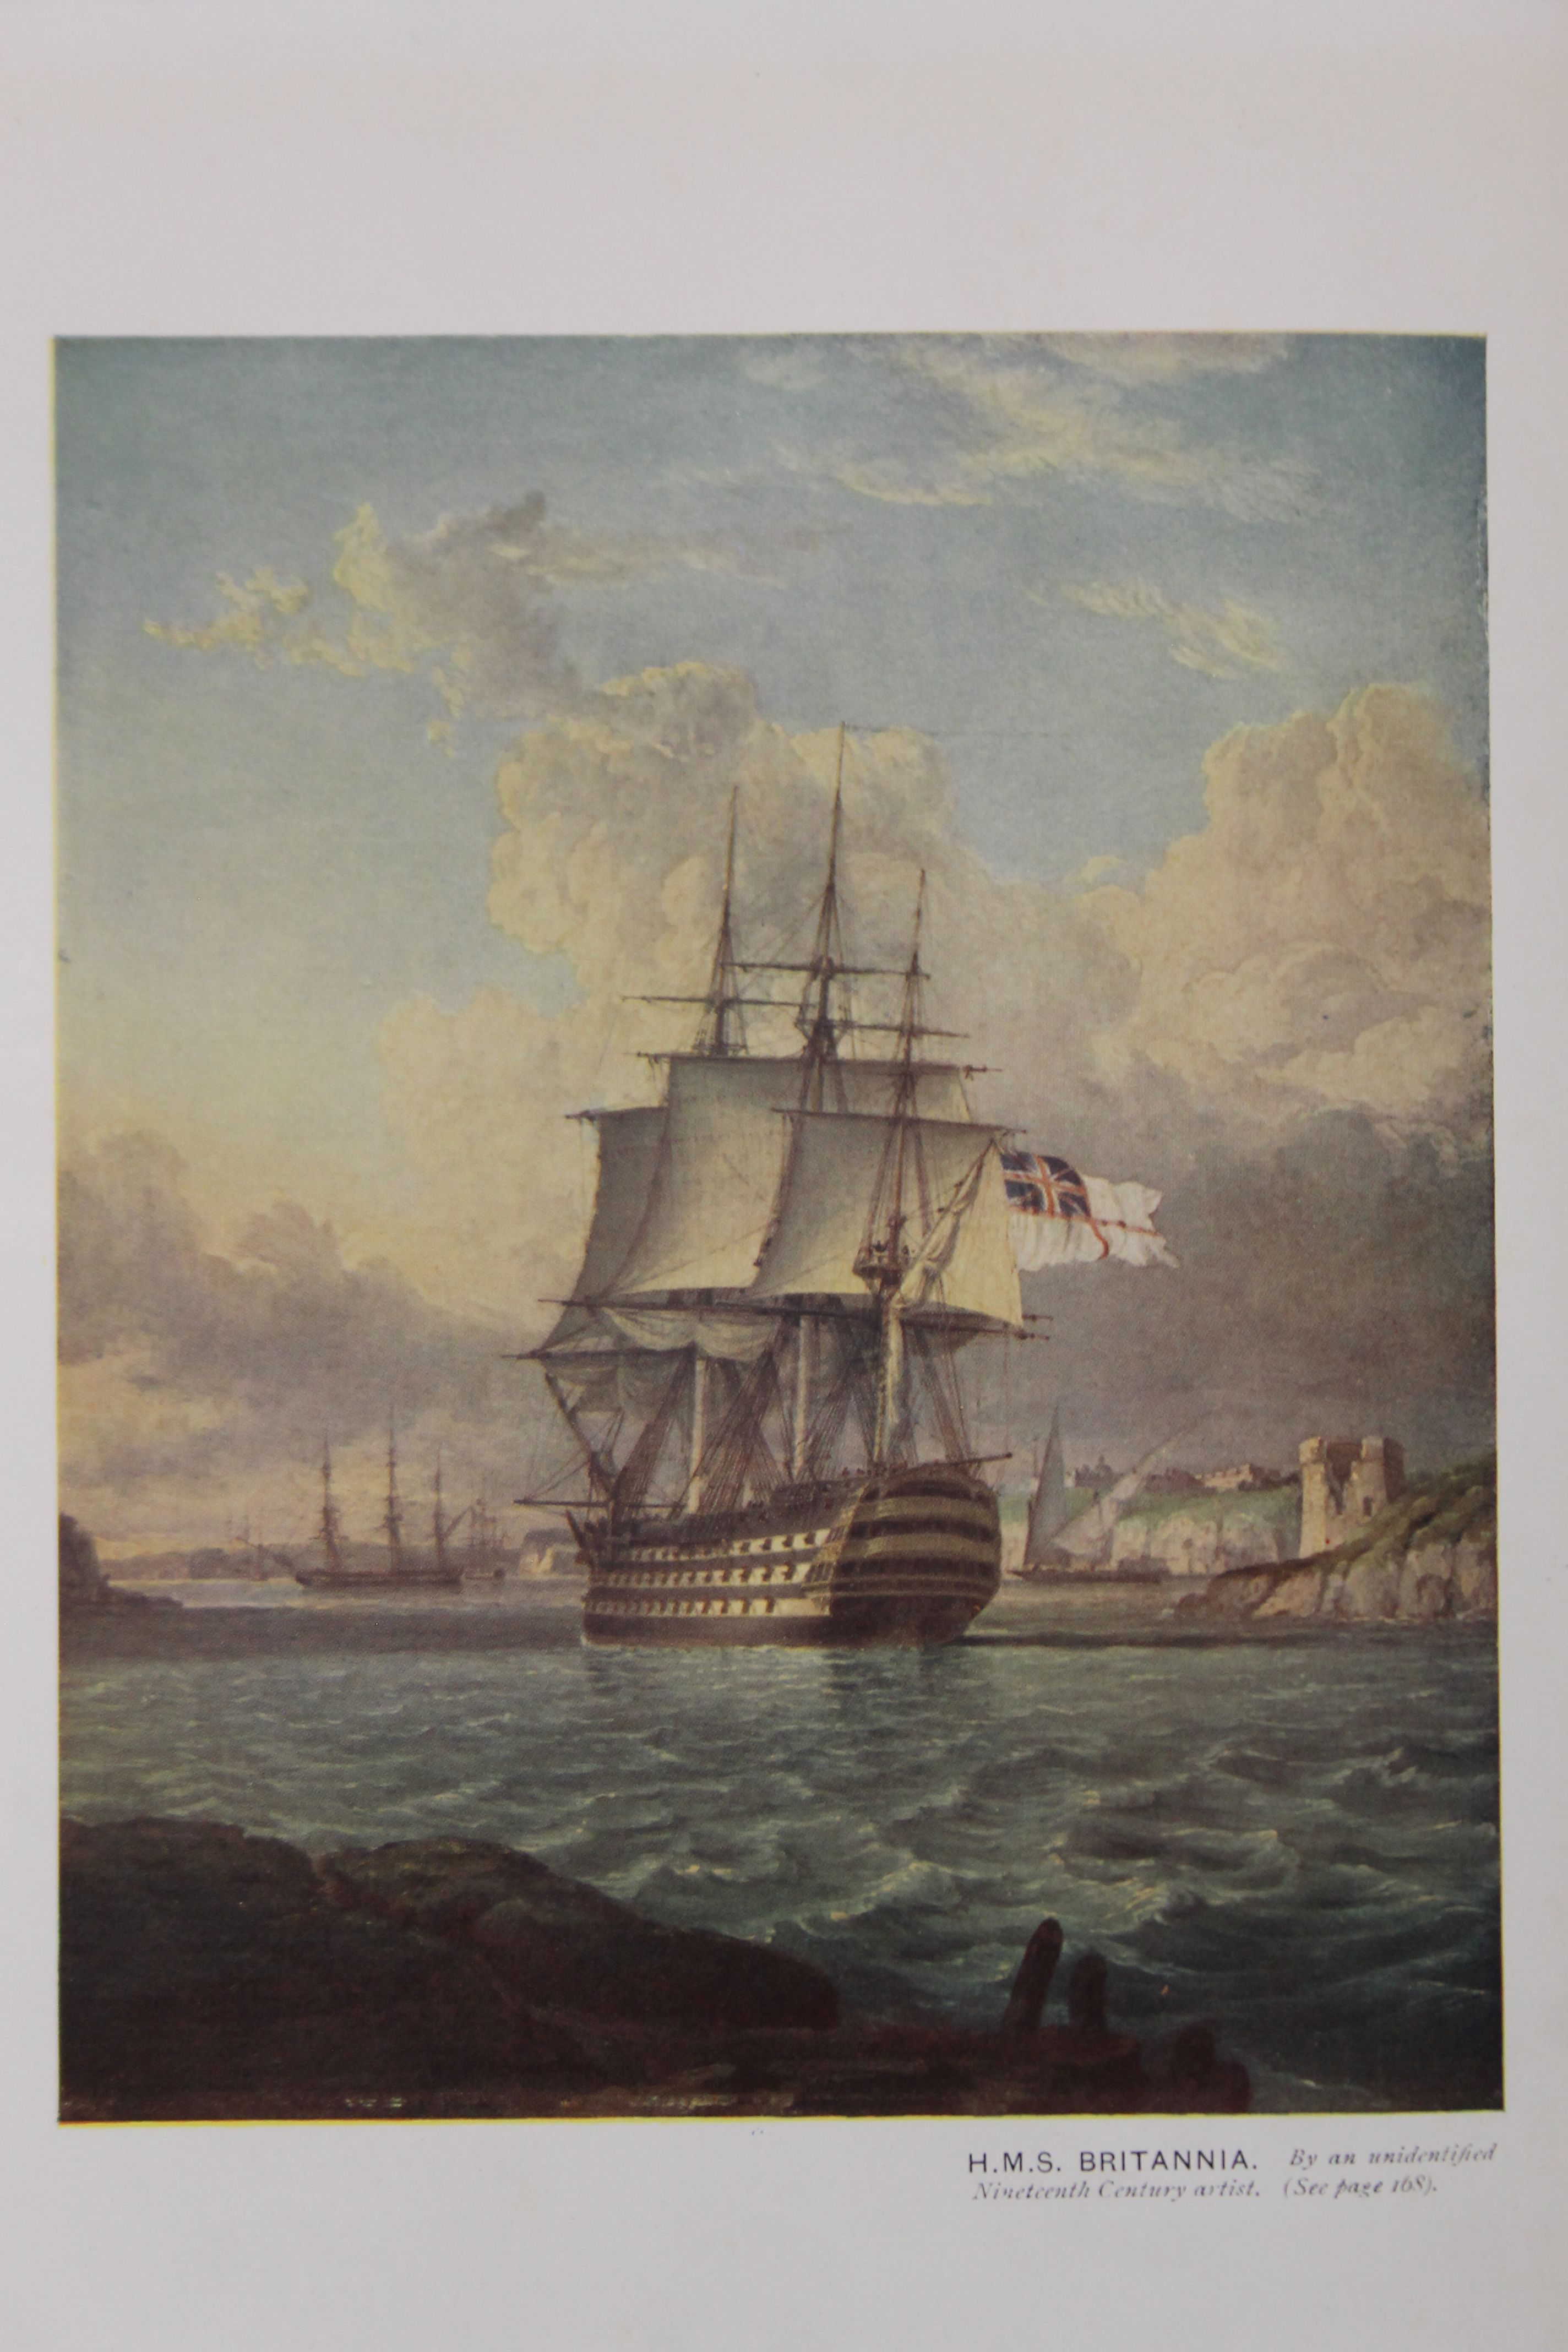 Gavin (C M), Royal Yachts, limited to 100 copies, this copy 43, full morocco, 4to, - Image 17 of 18